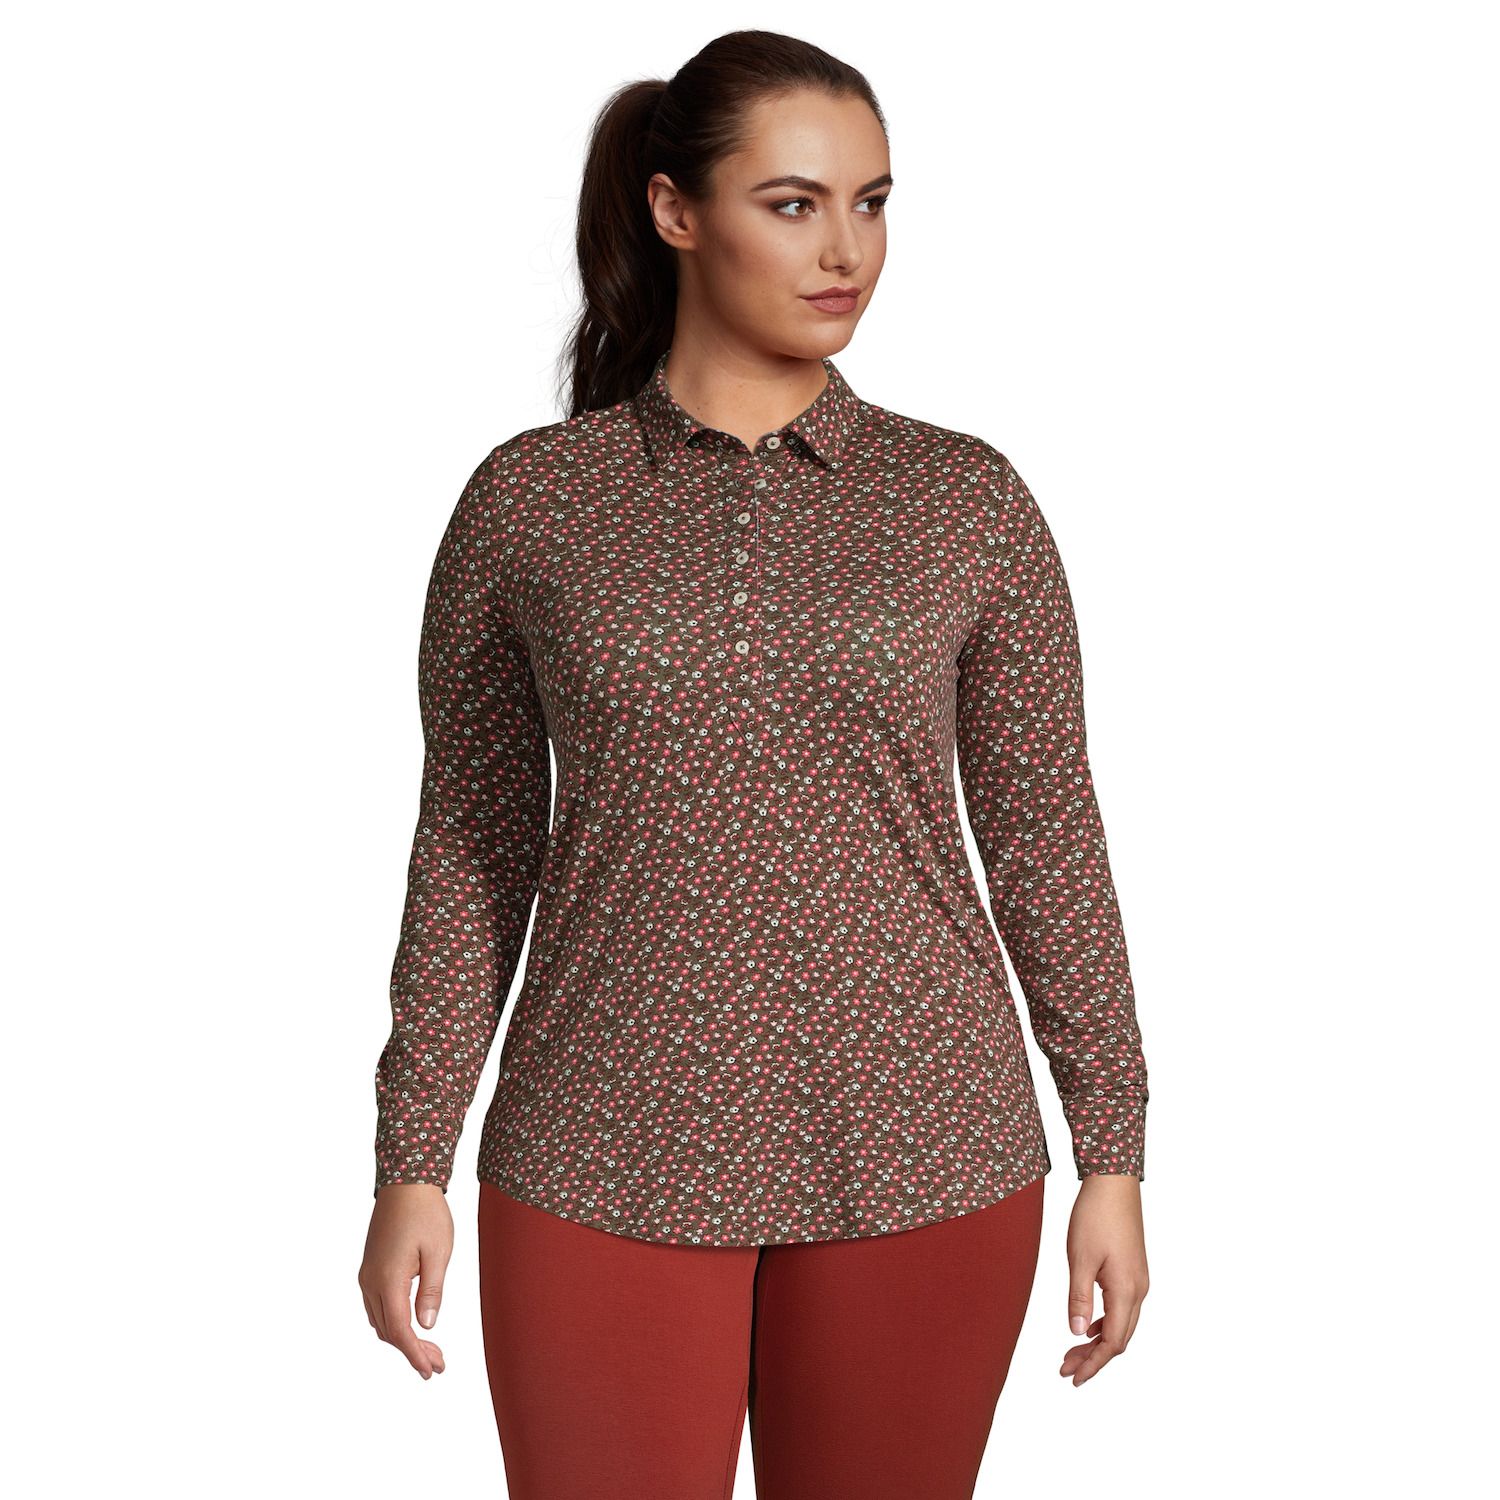 Image for Lands' End Plus Size Long Sleeve Popover Tunic at Kohl's.